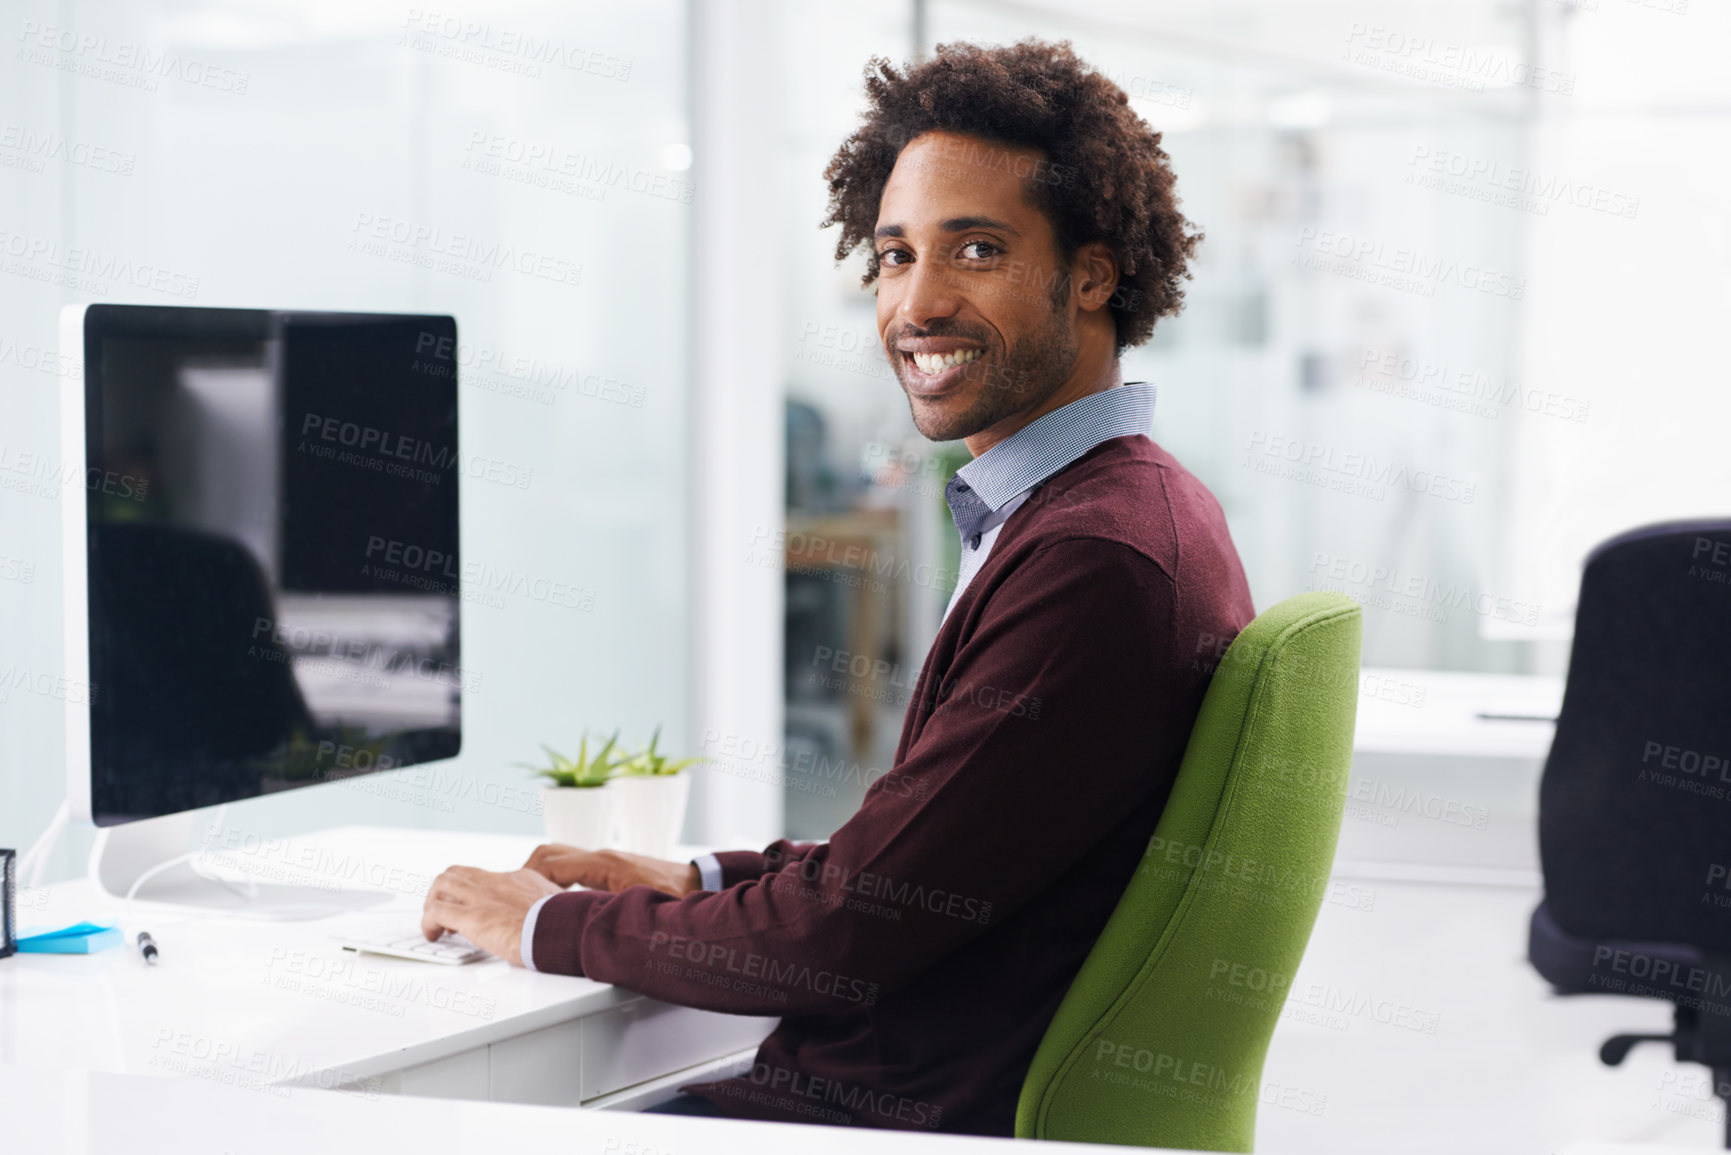 Buy stock photo Smile, computer and portrait of businessman, happy and desk in corporate office. Technology, typing and keyboard for professional employee, desktop and screen online for email at company workplace